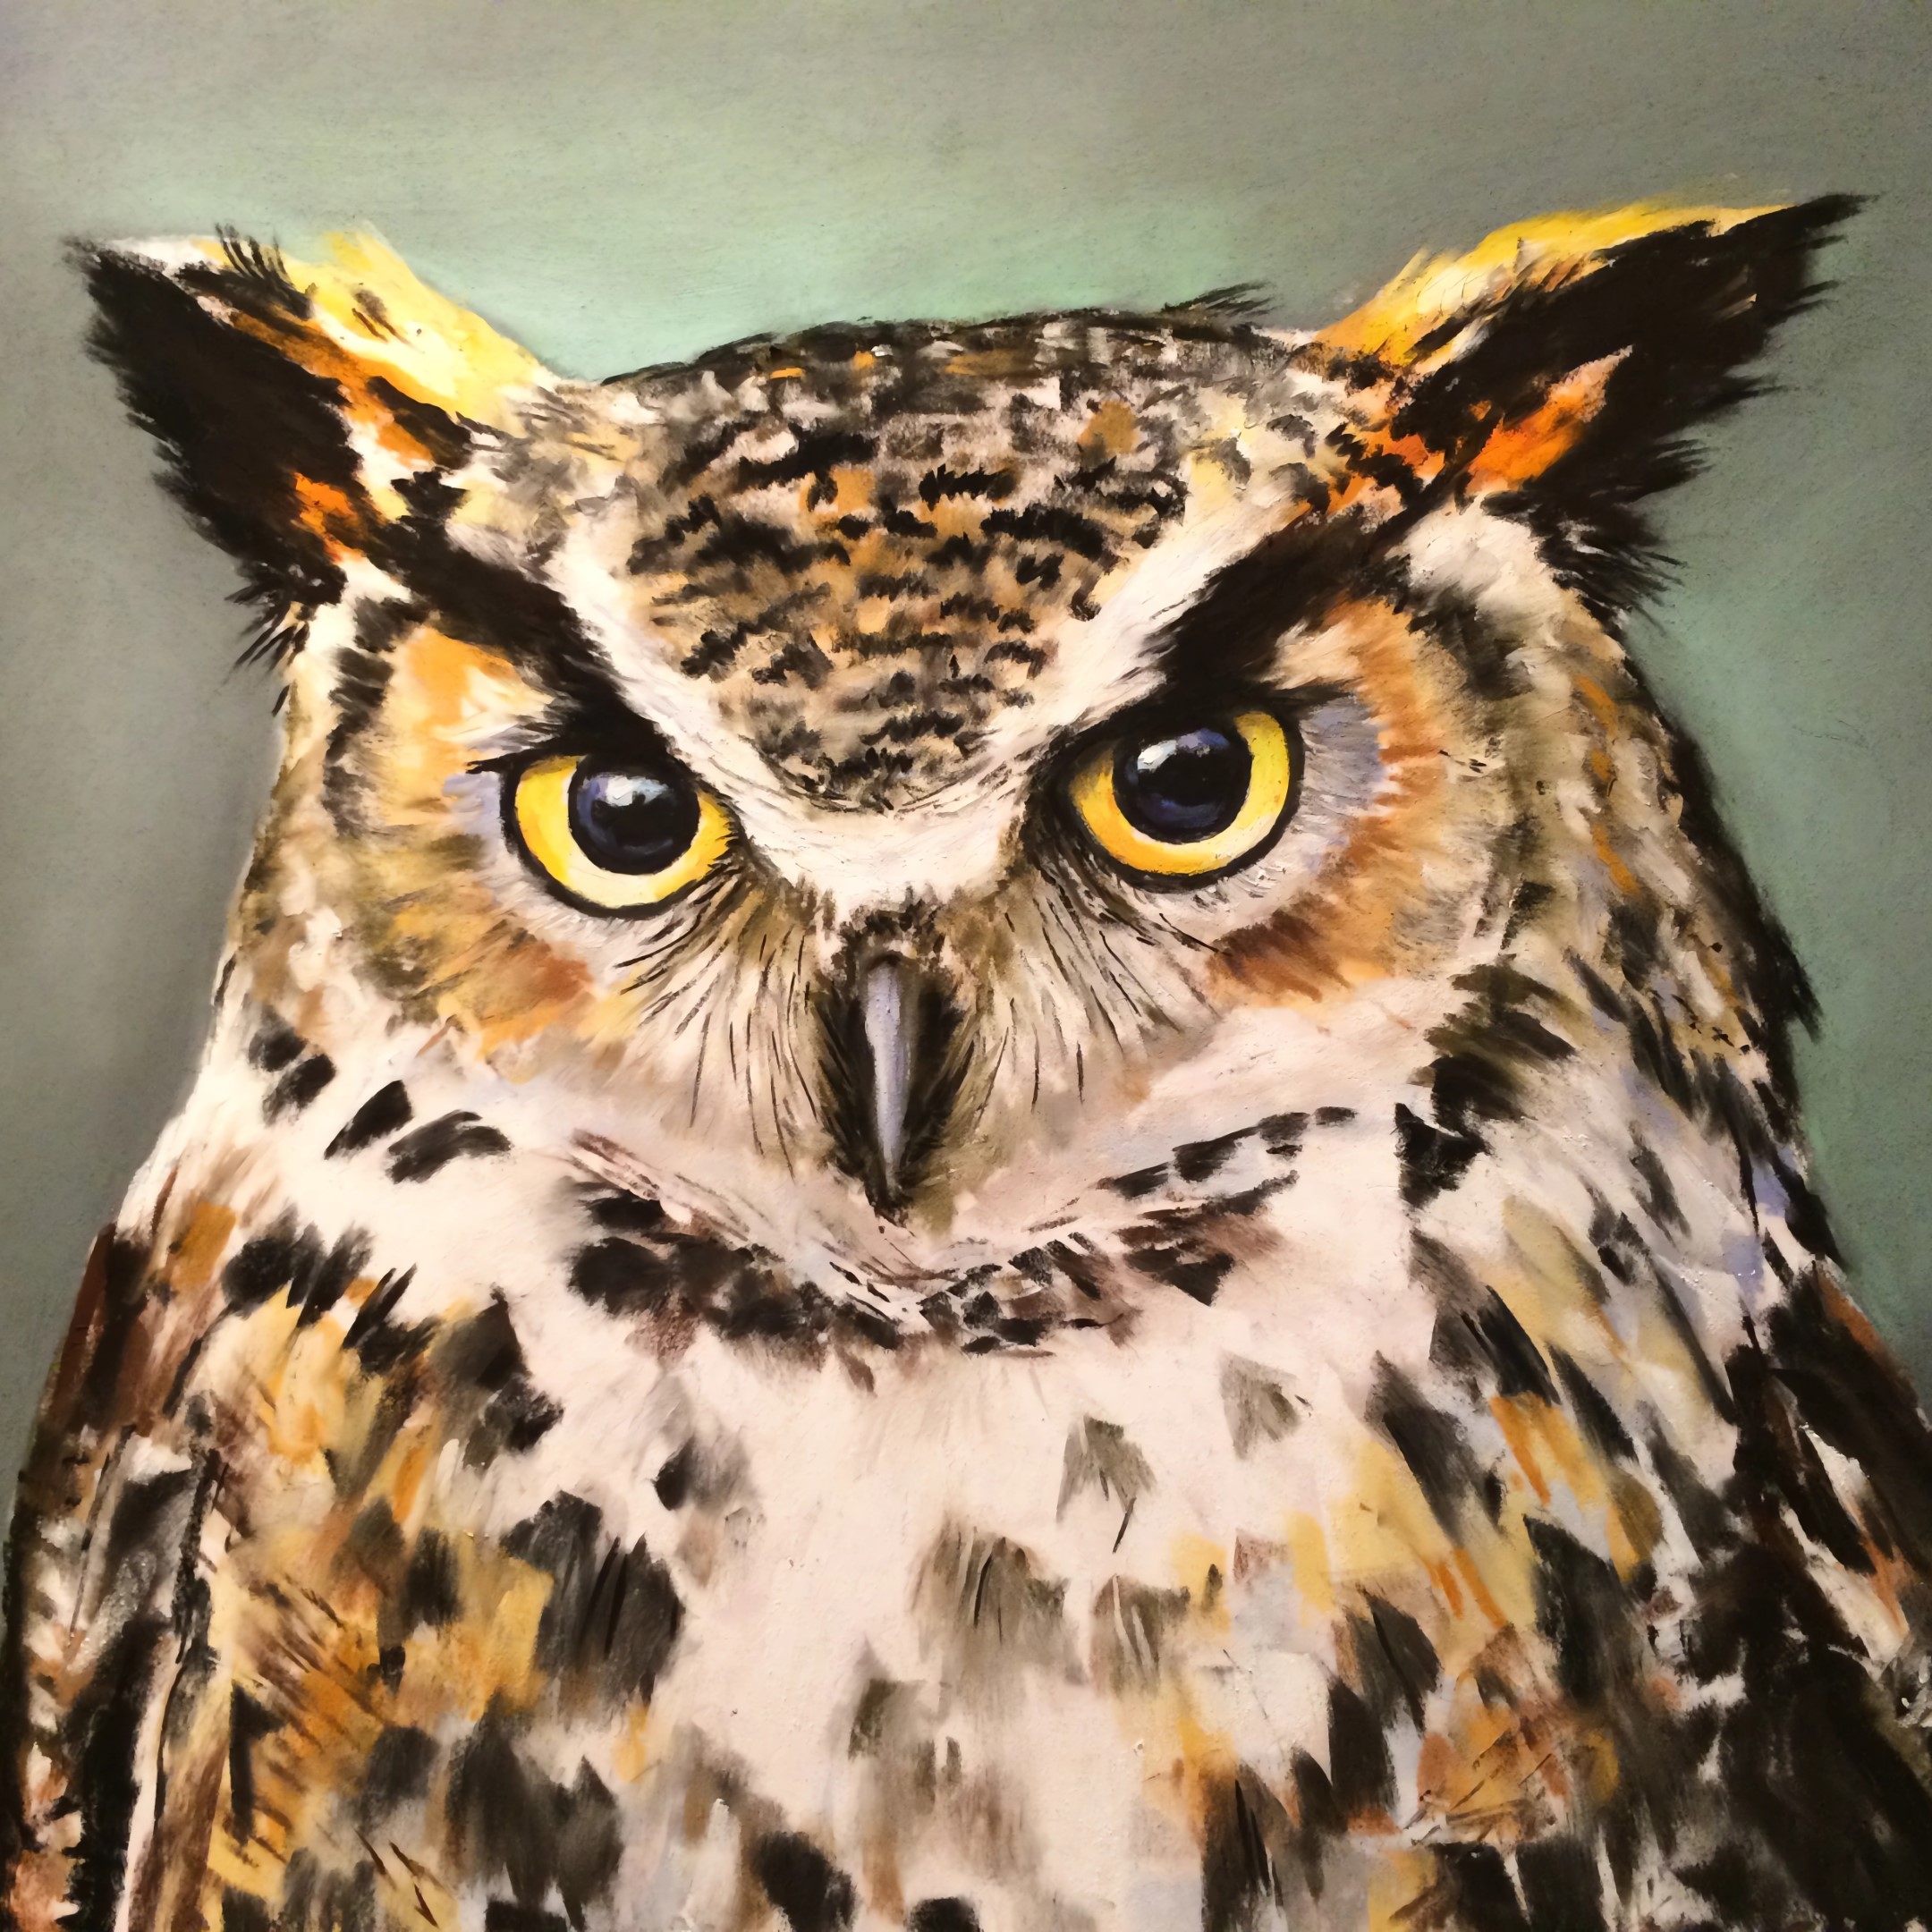 A pastel painting of an owl created by ArtisOn